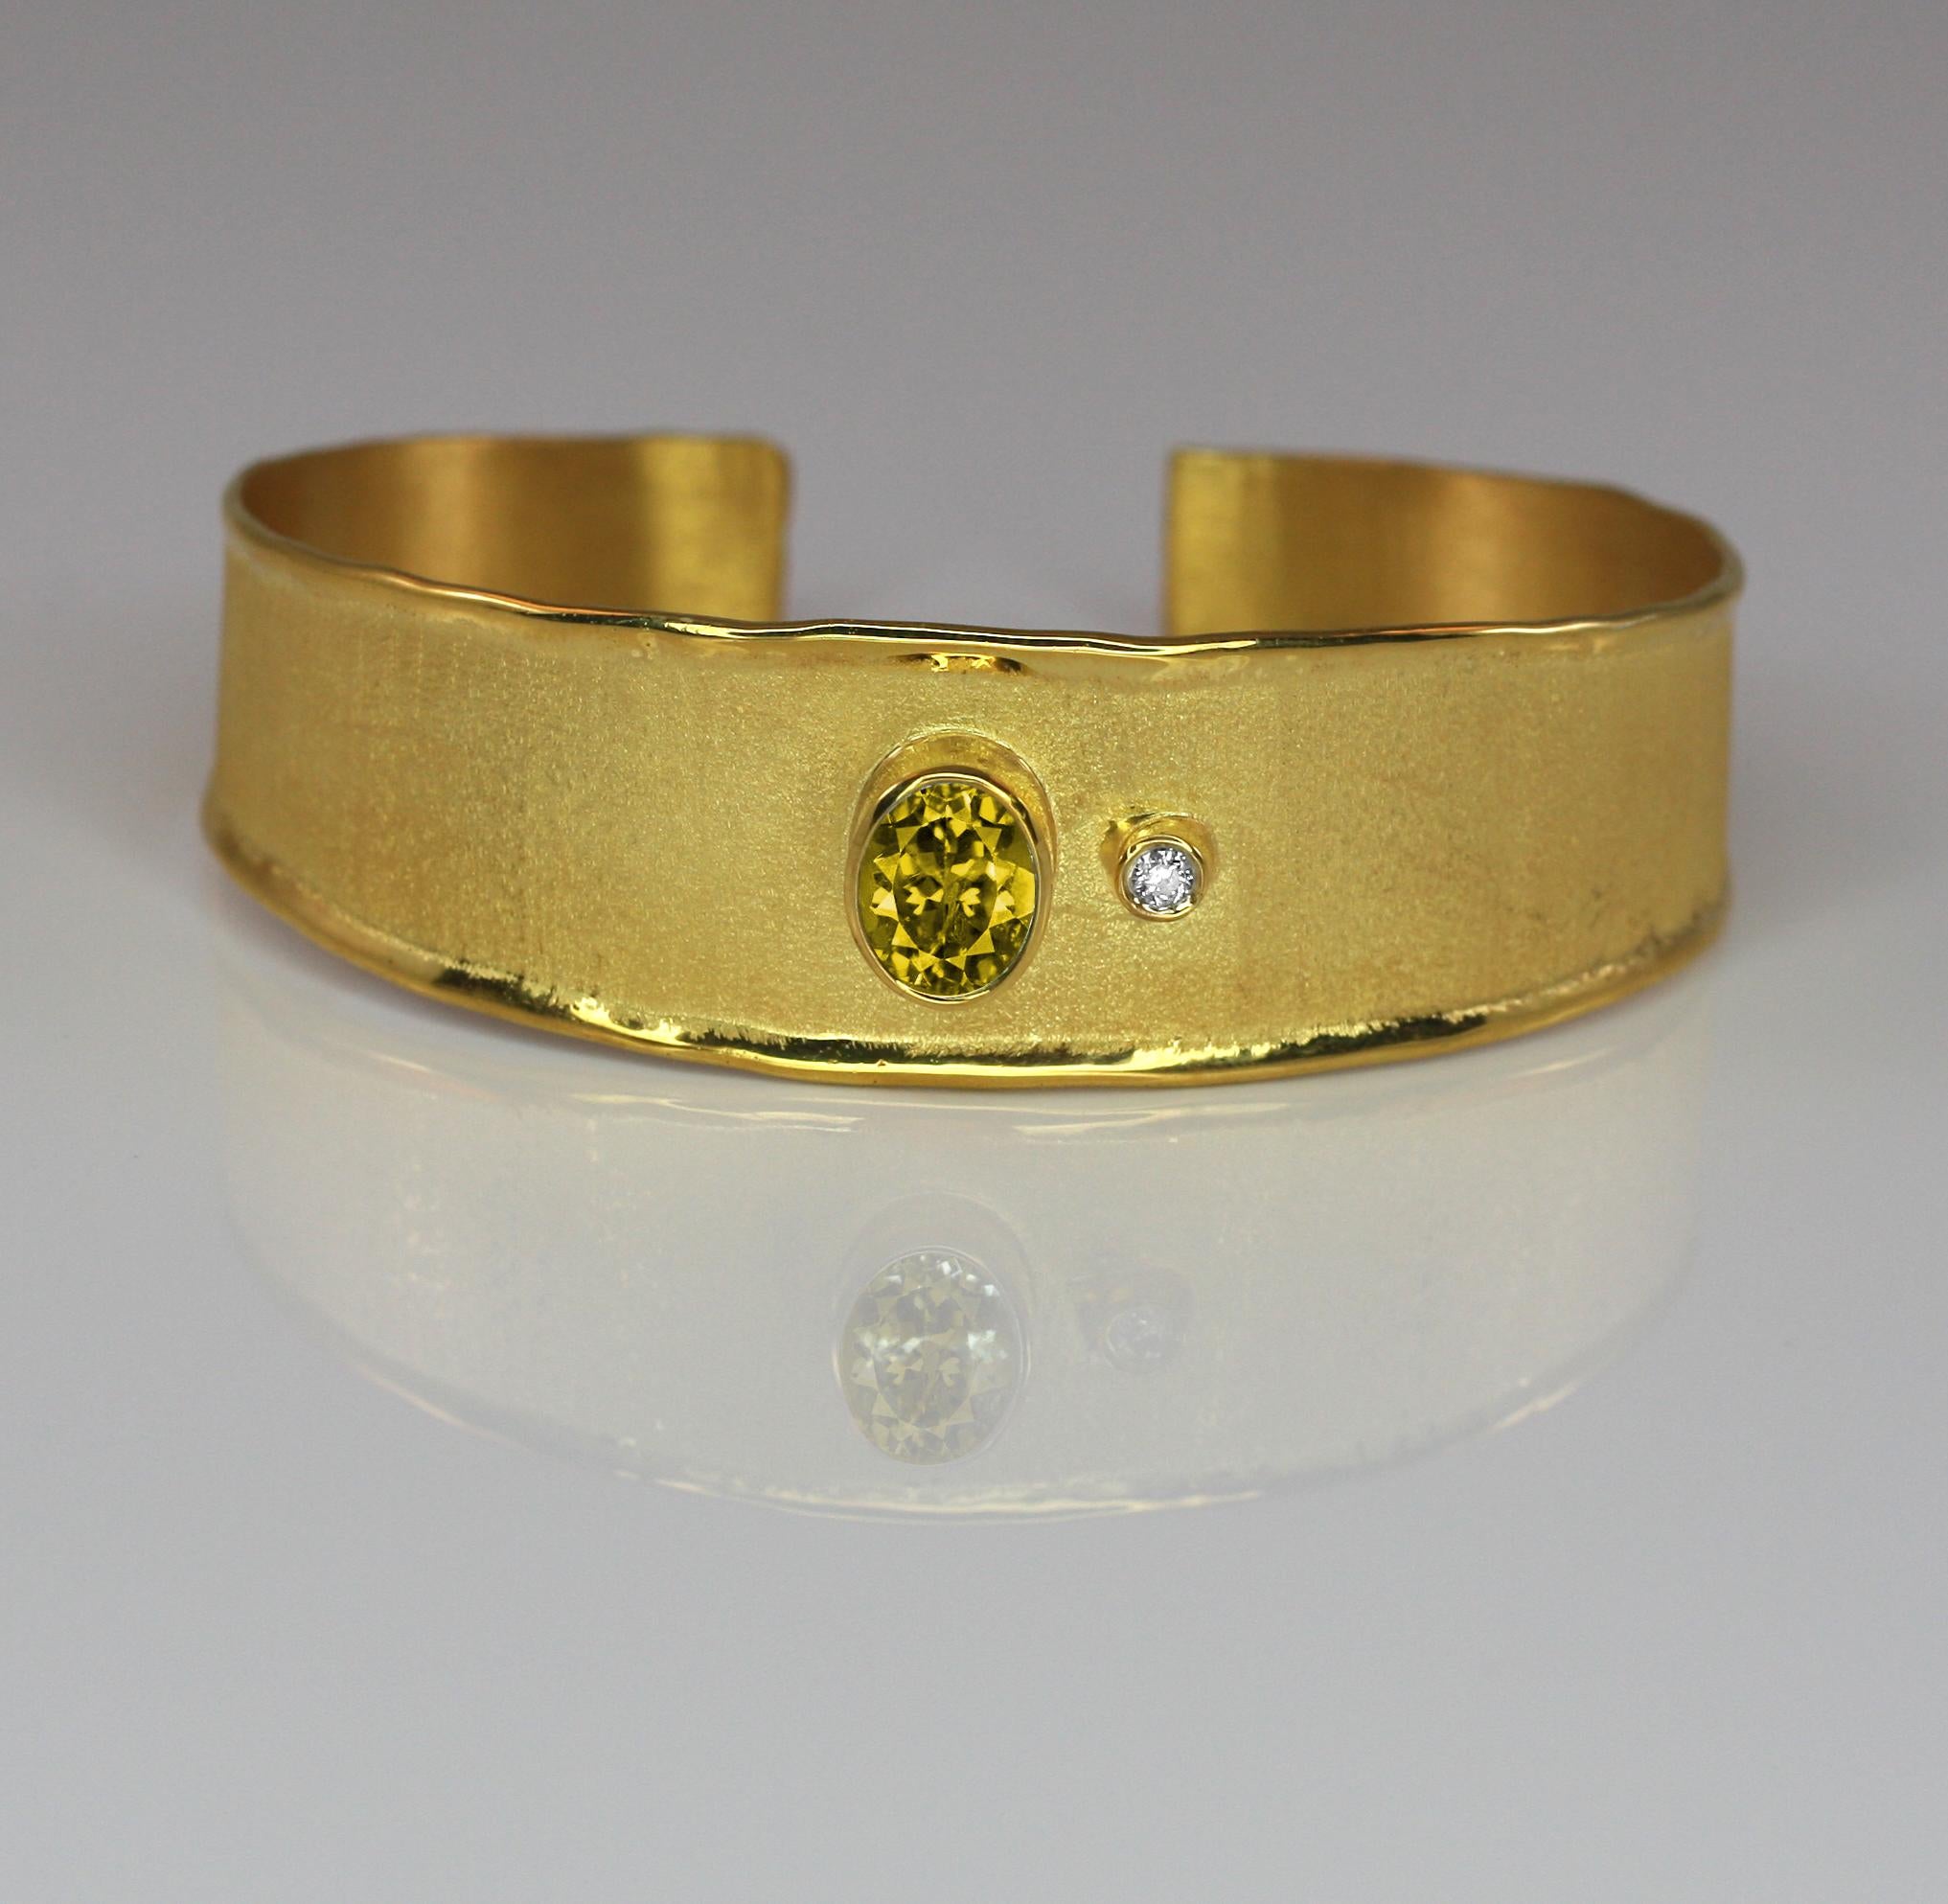 Yianni Creations 18 Karat Solid Yellow Gold Diamond Bracelet With a Citrine In New Condition For Sale In Astoria, NY